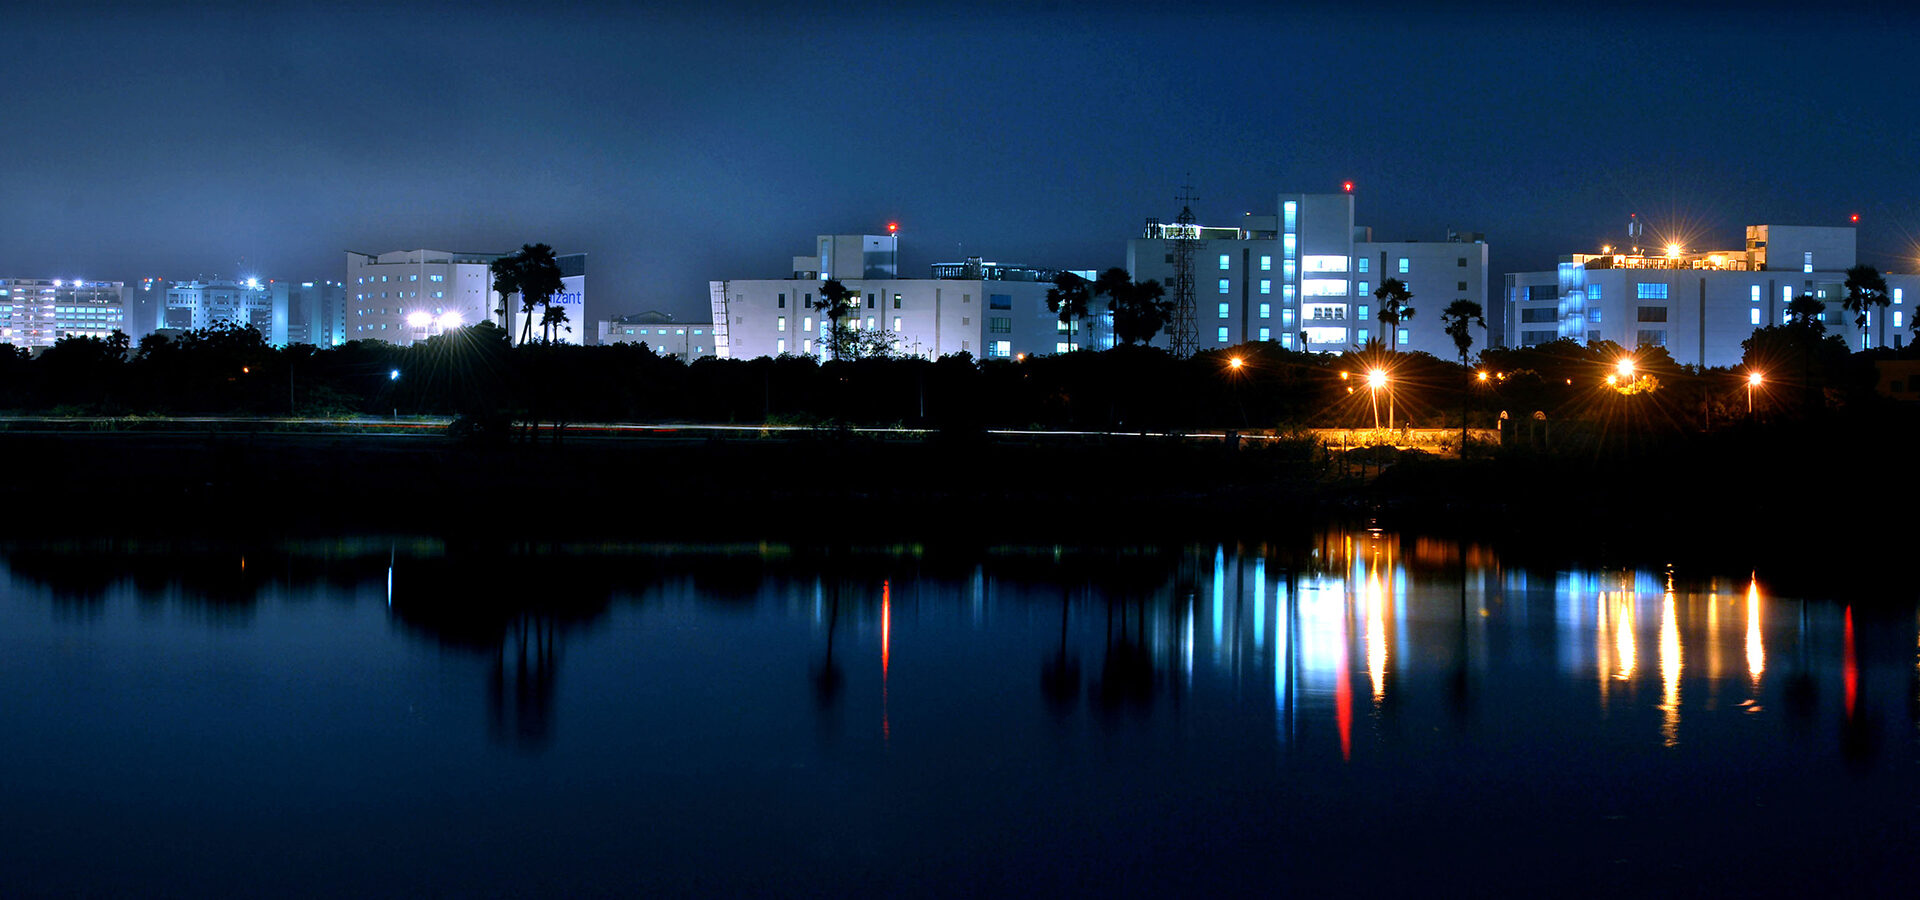 The IT parks in Tharamani and Perungudi like  Ascendas, Ticel Park,Tidel Park, Cognizant and RMZ Millinia business complex first part are giving a spectacular view  from the Perungudi Lake especially in the night  . Shaju john